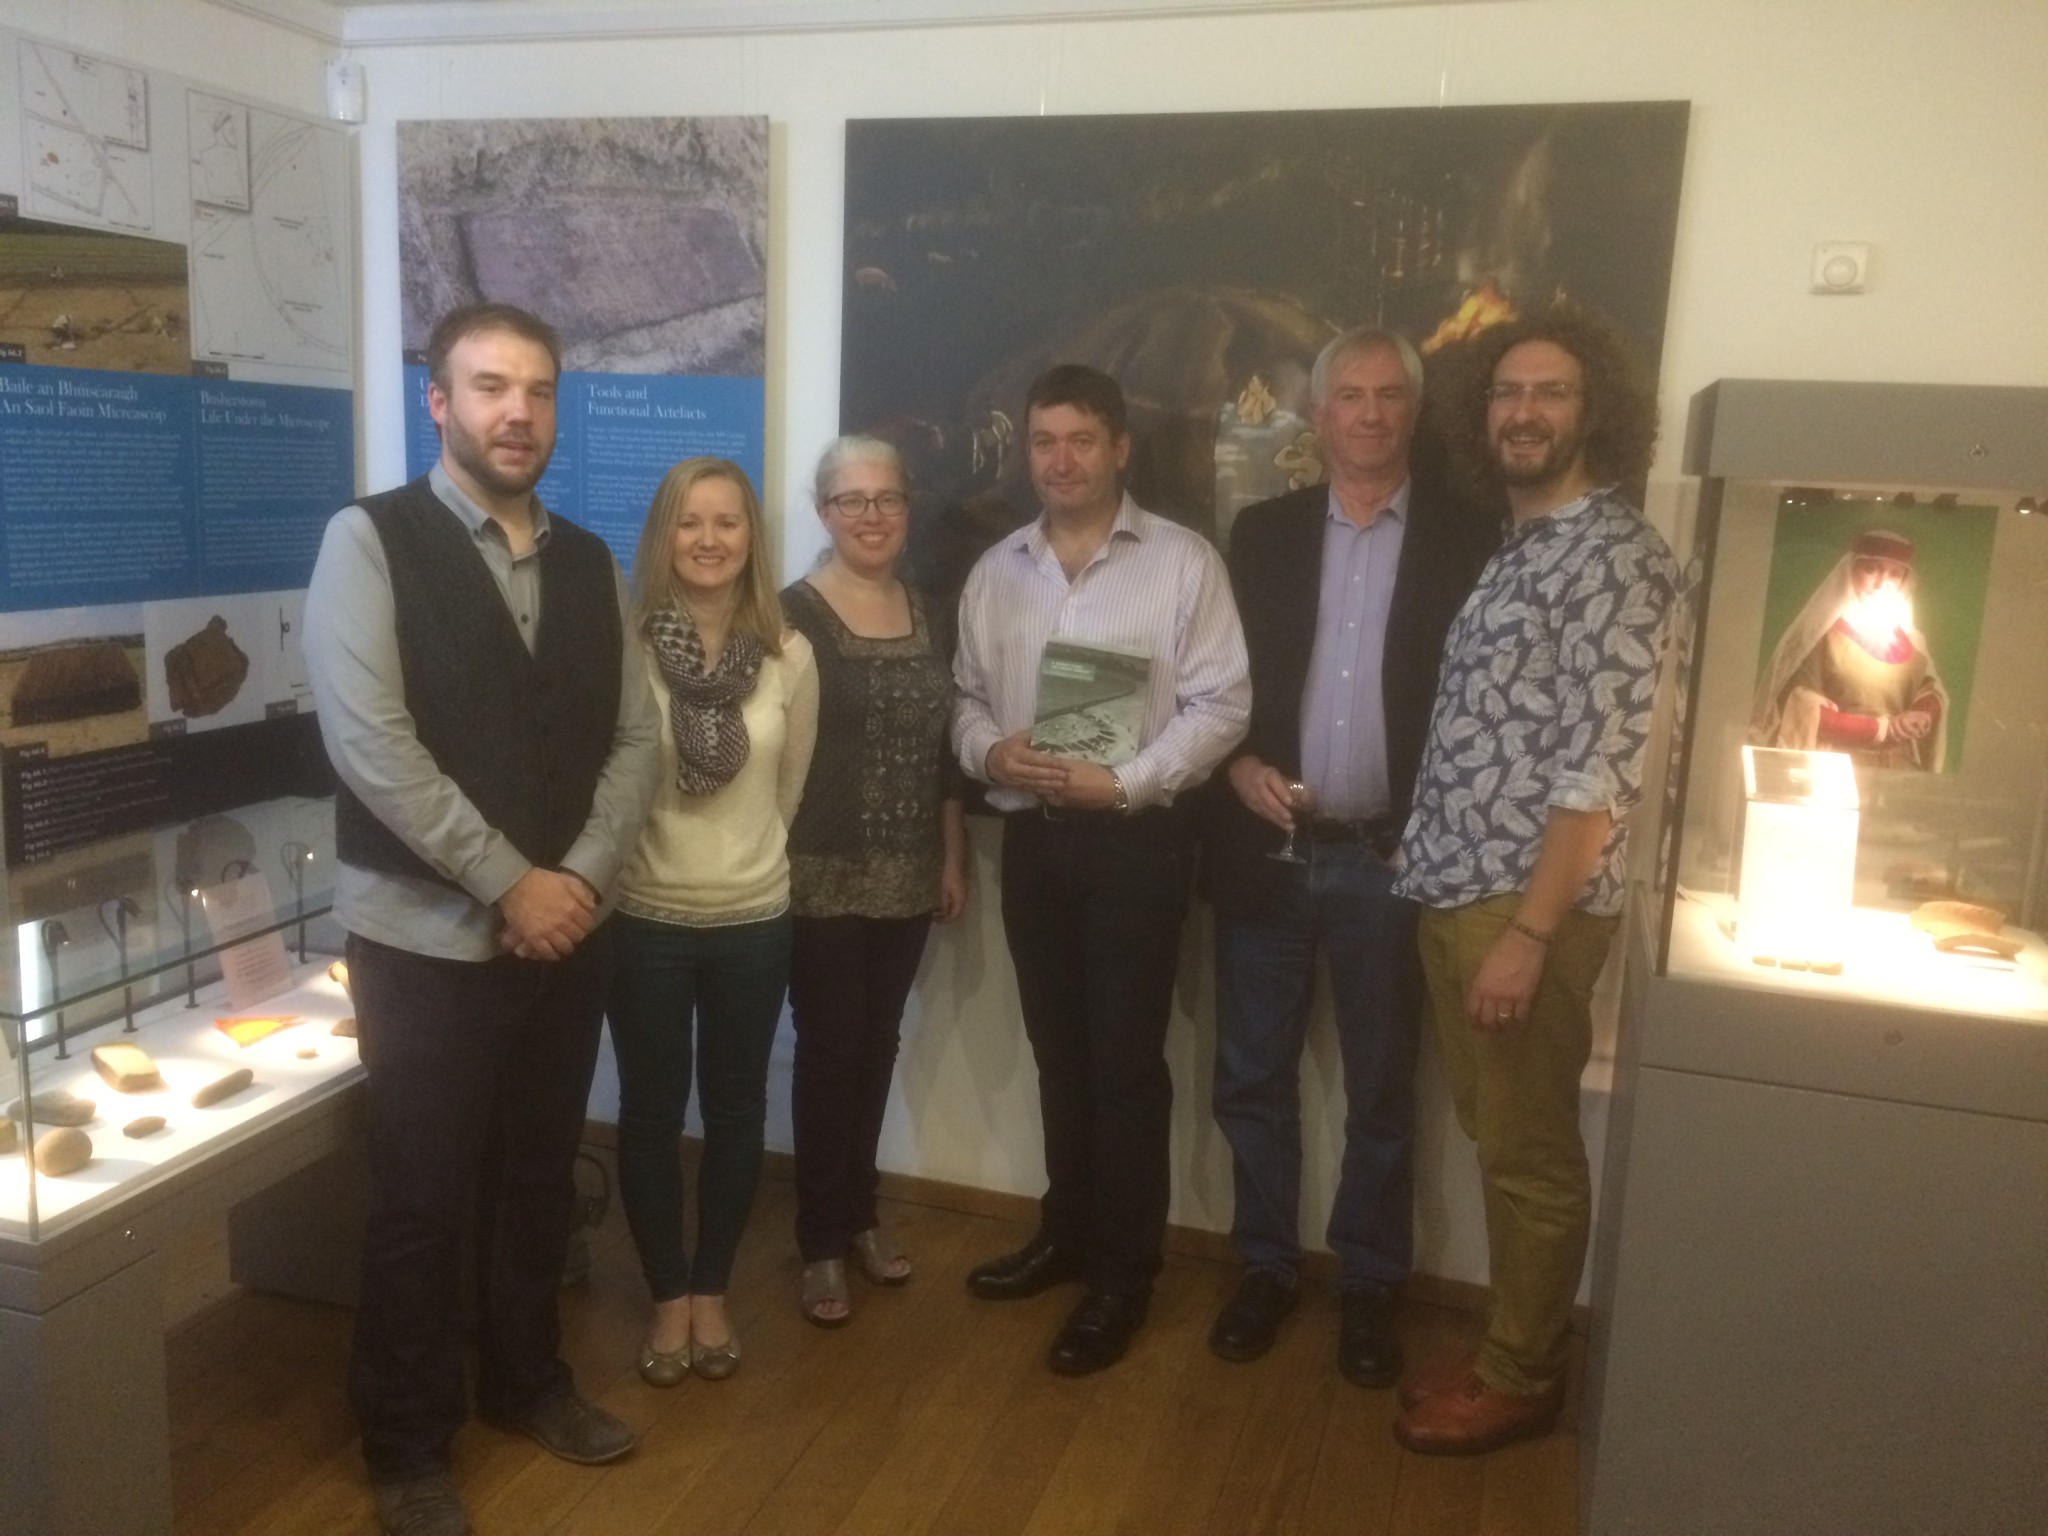 At the Launch of 'A Journey Along The Carlow Corridor' in Carlow Museum, surrounded by an exhibition of objects uncovered during the excavations. L-R Damian Shiels, Carmelita Troy, Teresa Bolger, Colm Moloney, Angus Stephenson, Jonathan Millar.